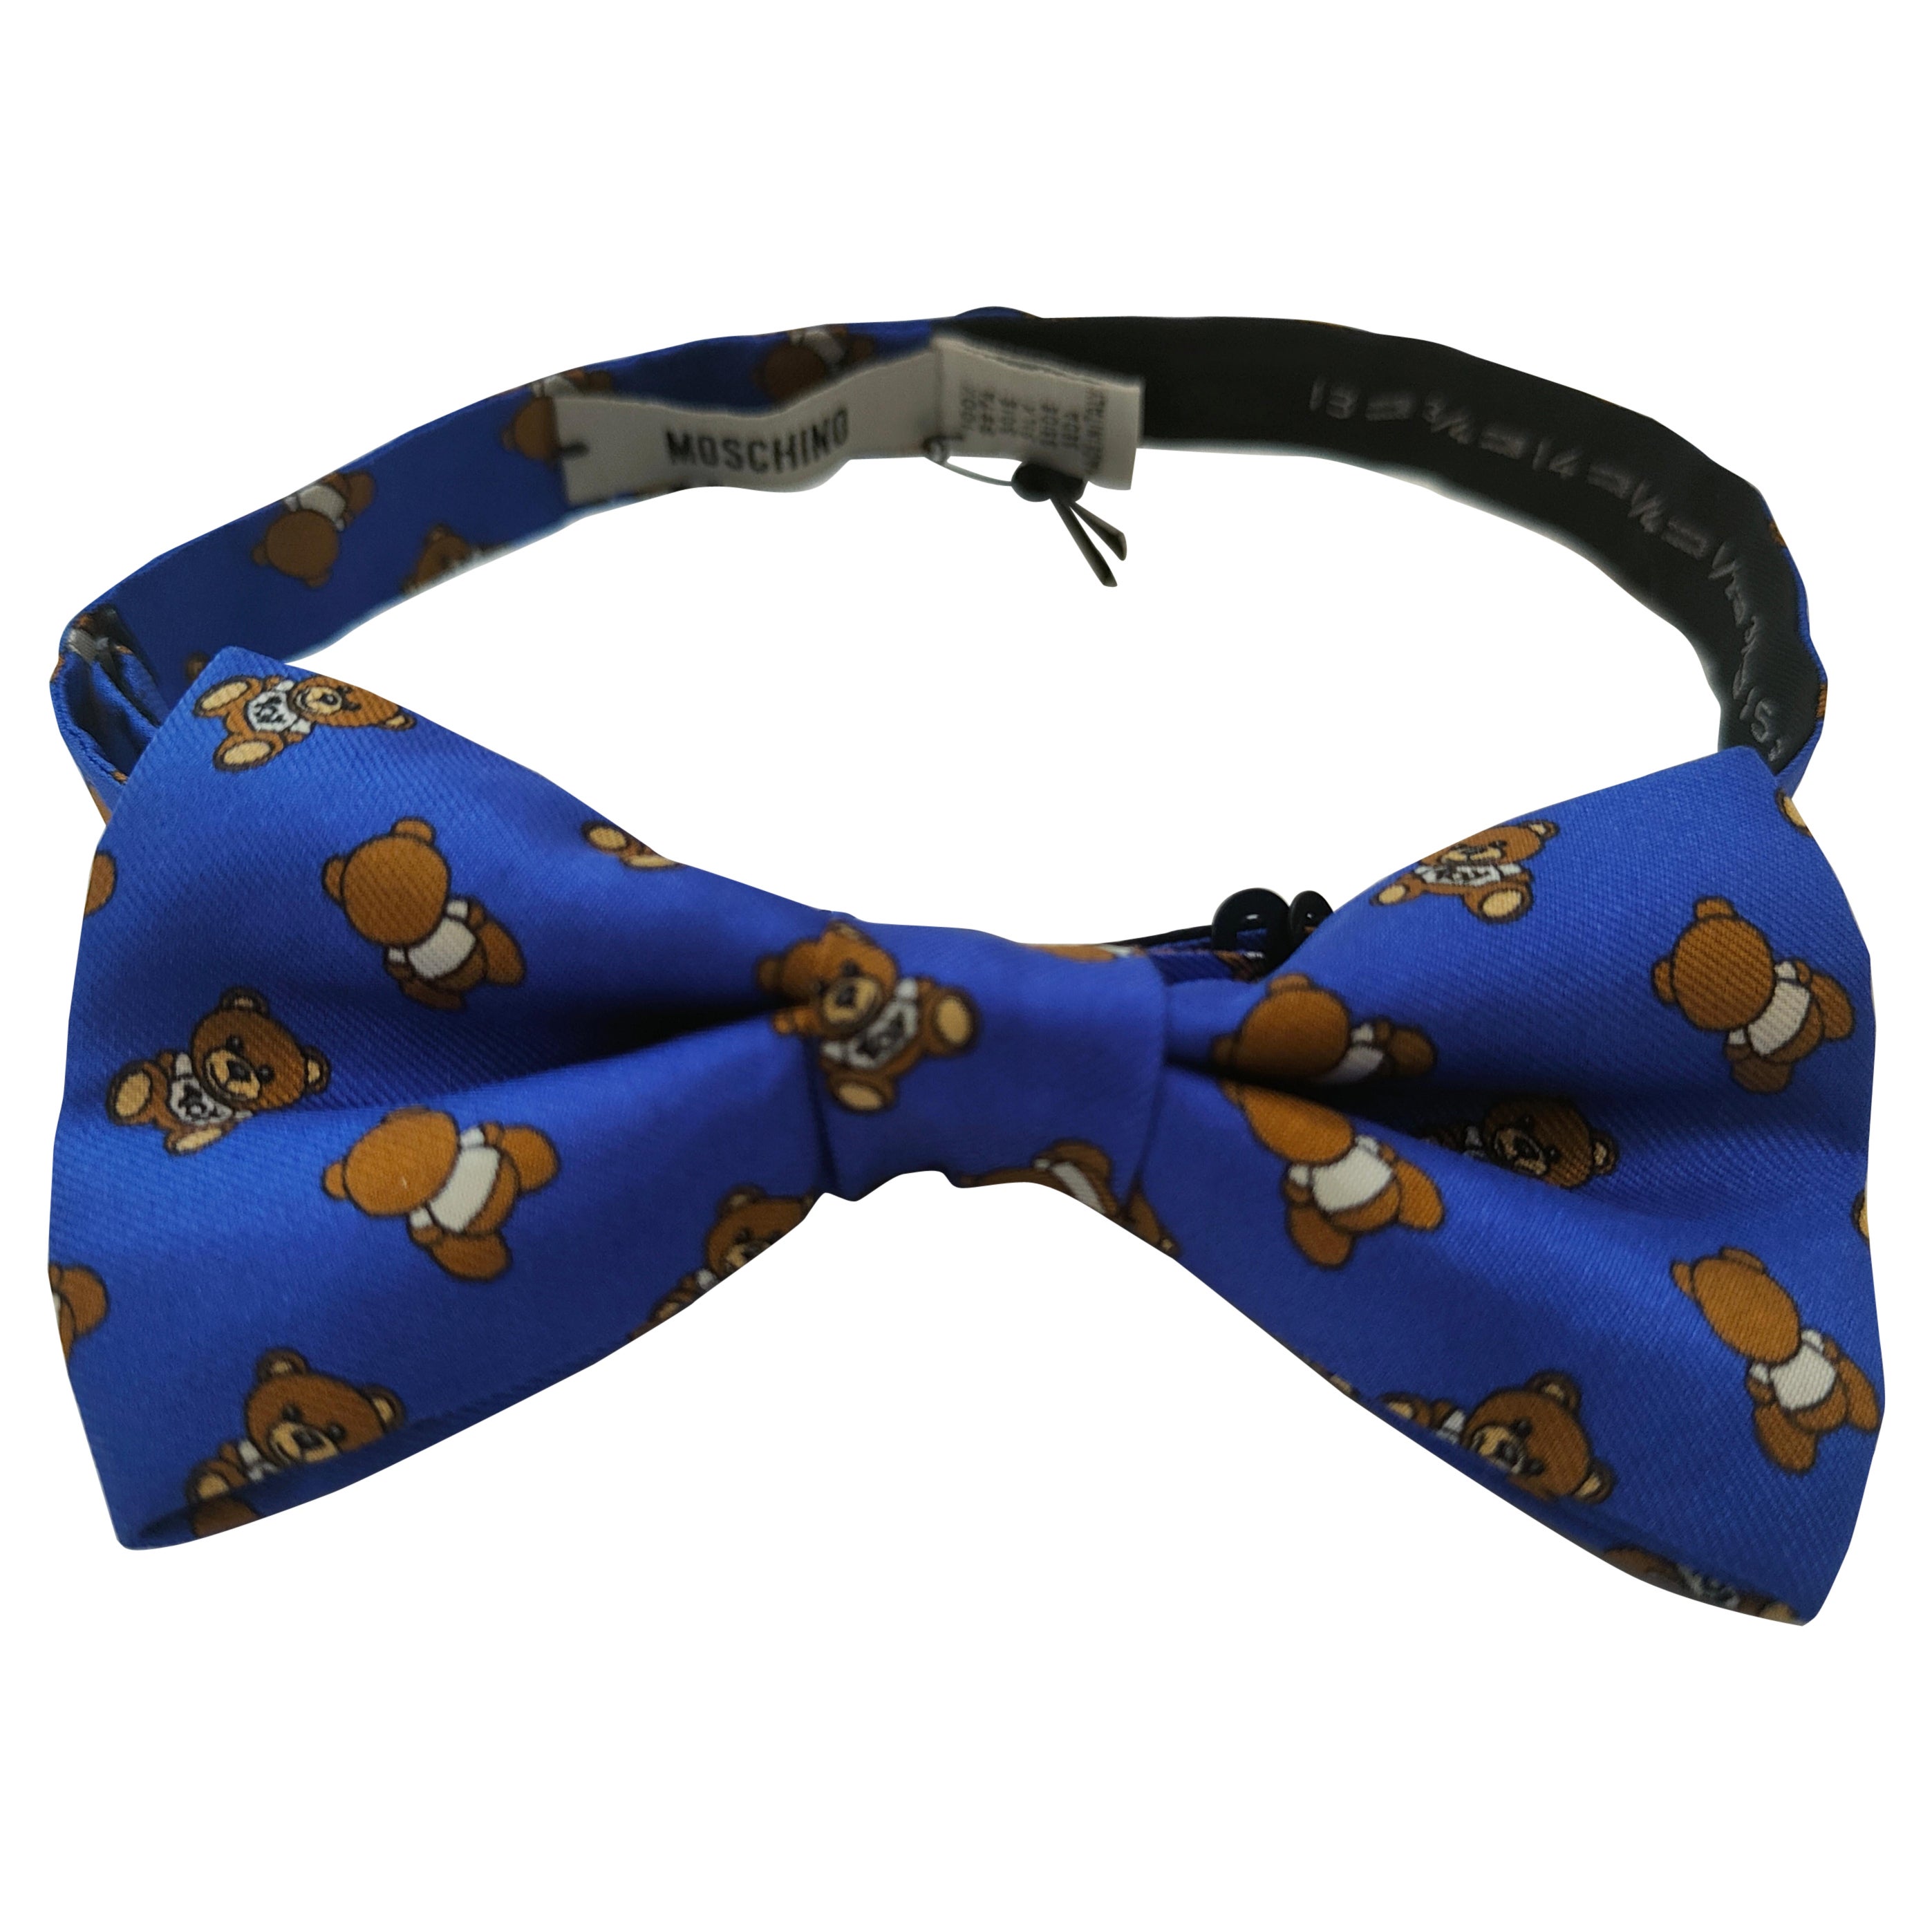 Moschino Blue multicoloured bow tie NWOT